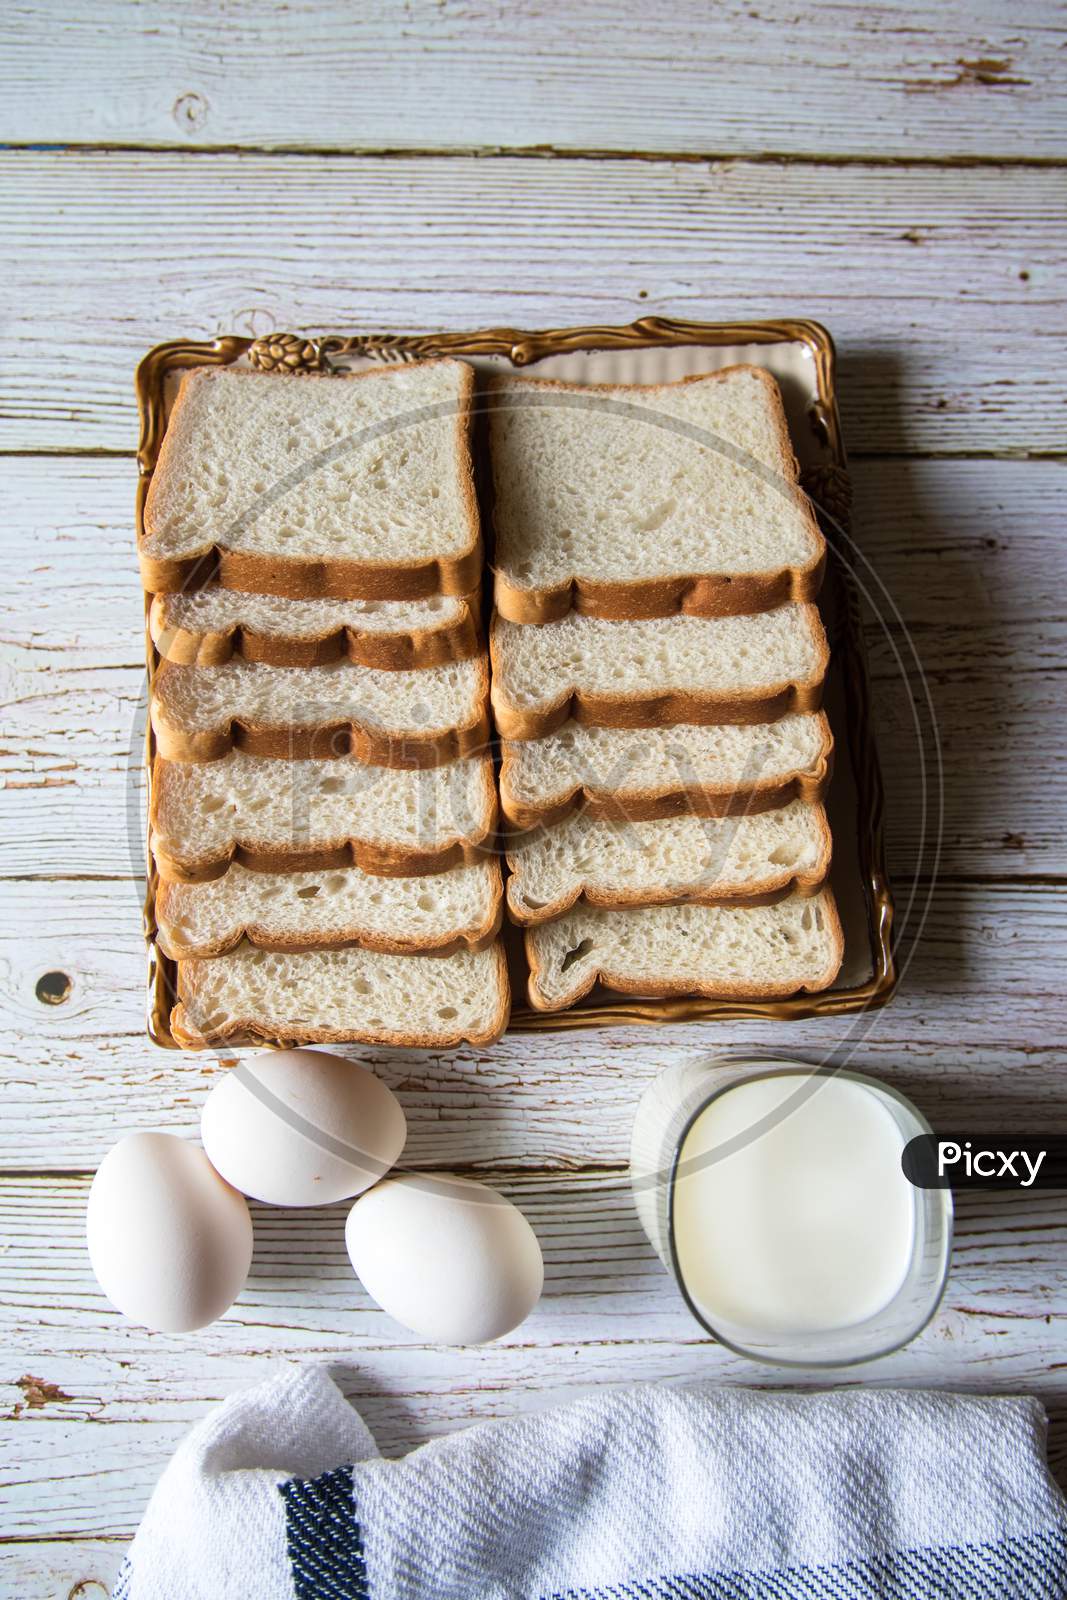 Top view of bread slices, egg and a glass of milk